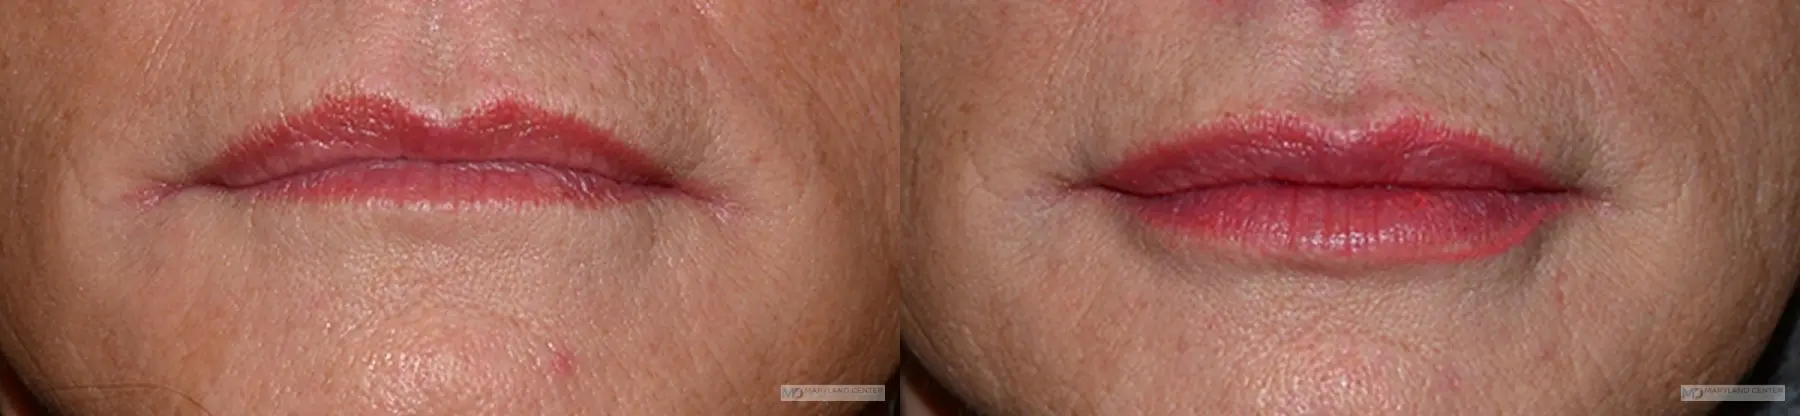 Injectables: Patient 1 - Before and After  